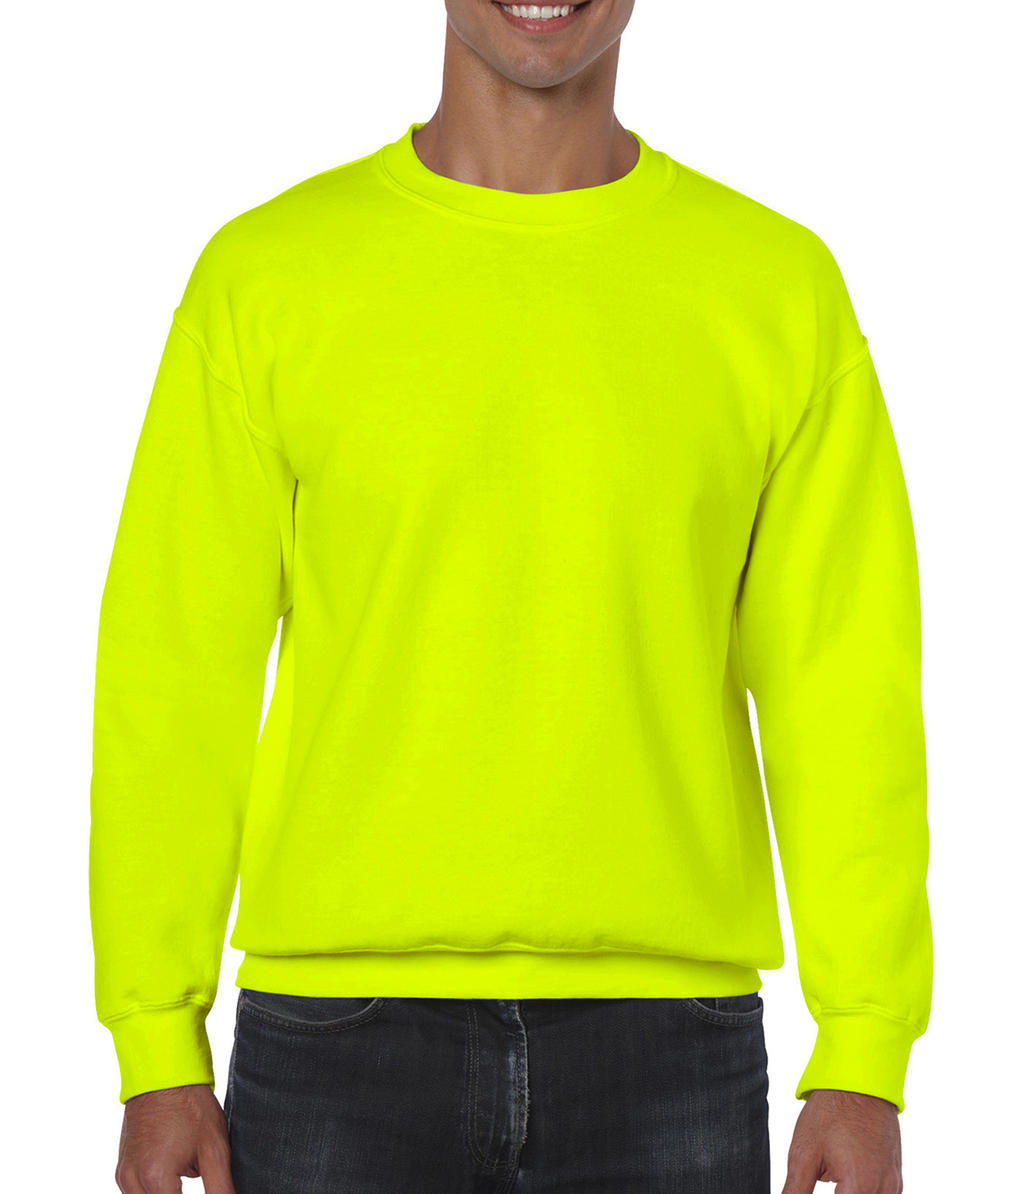  Heavy Blend Adult Crewneck Sweat in Farbe Safety Green